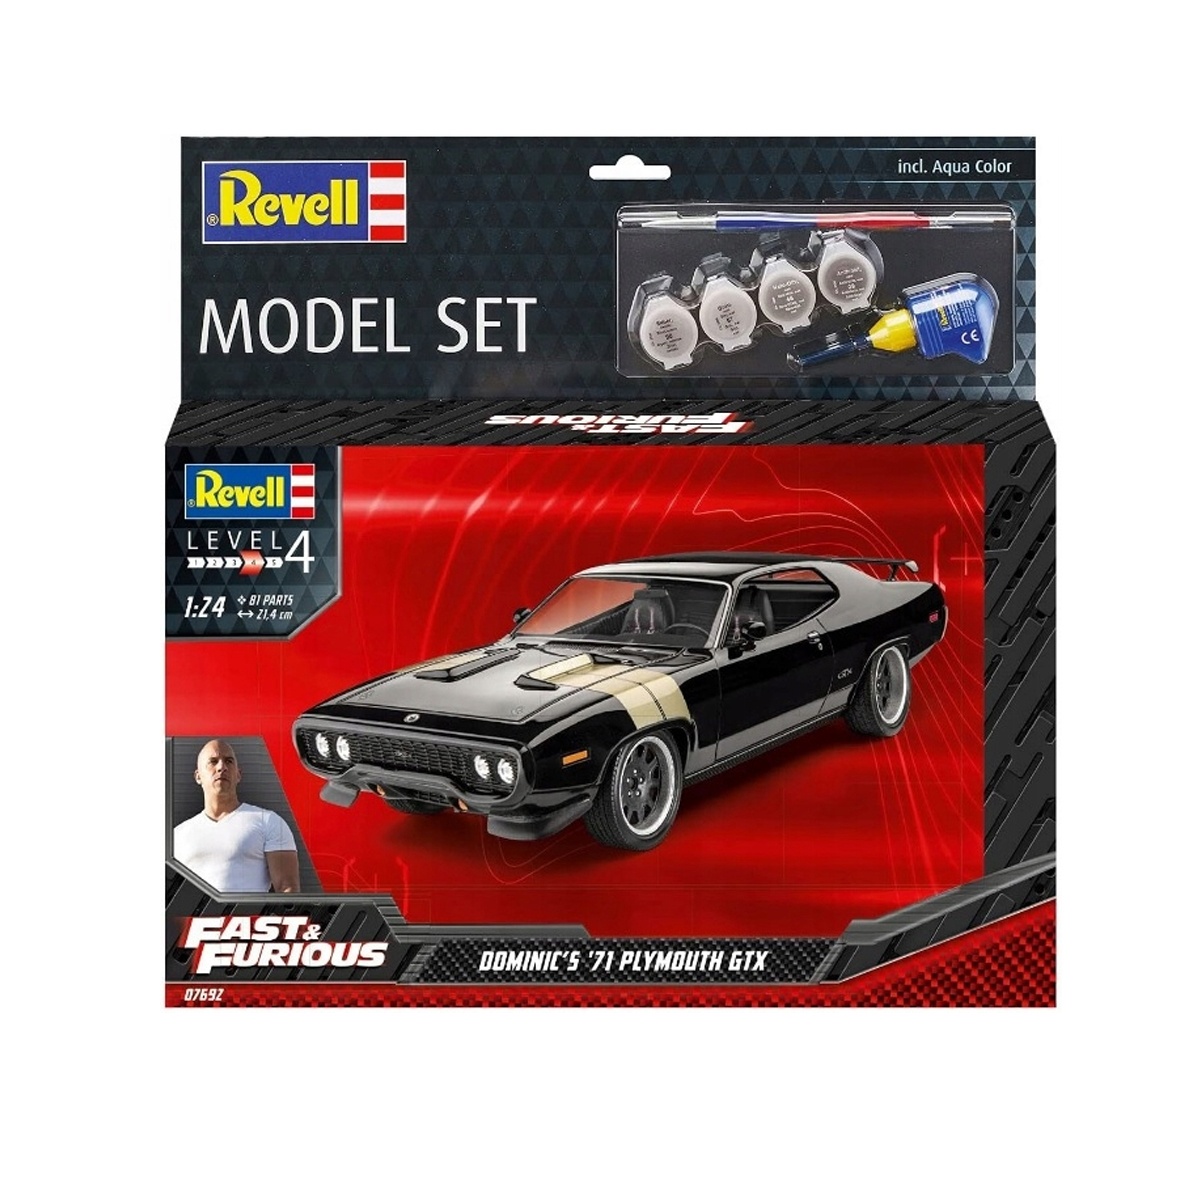 Revell 067692 Fast & Furious 1971 Plymouth GTX - Model Set